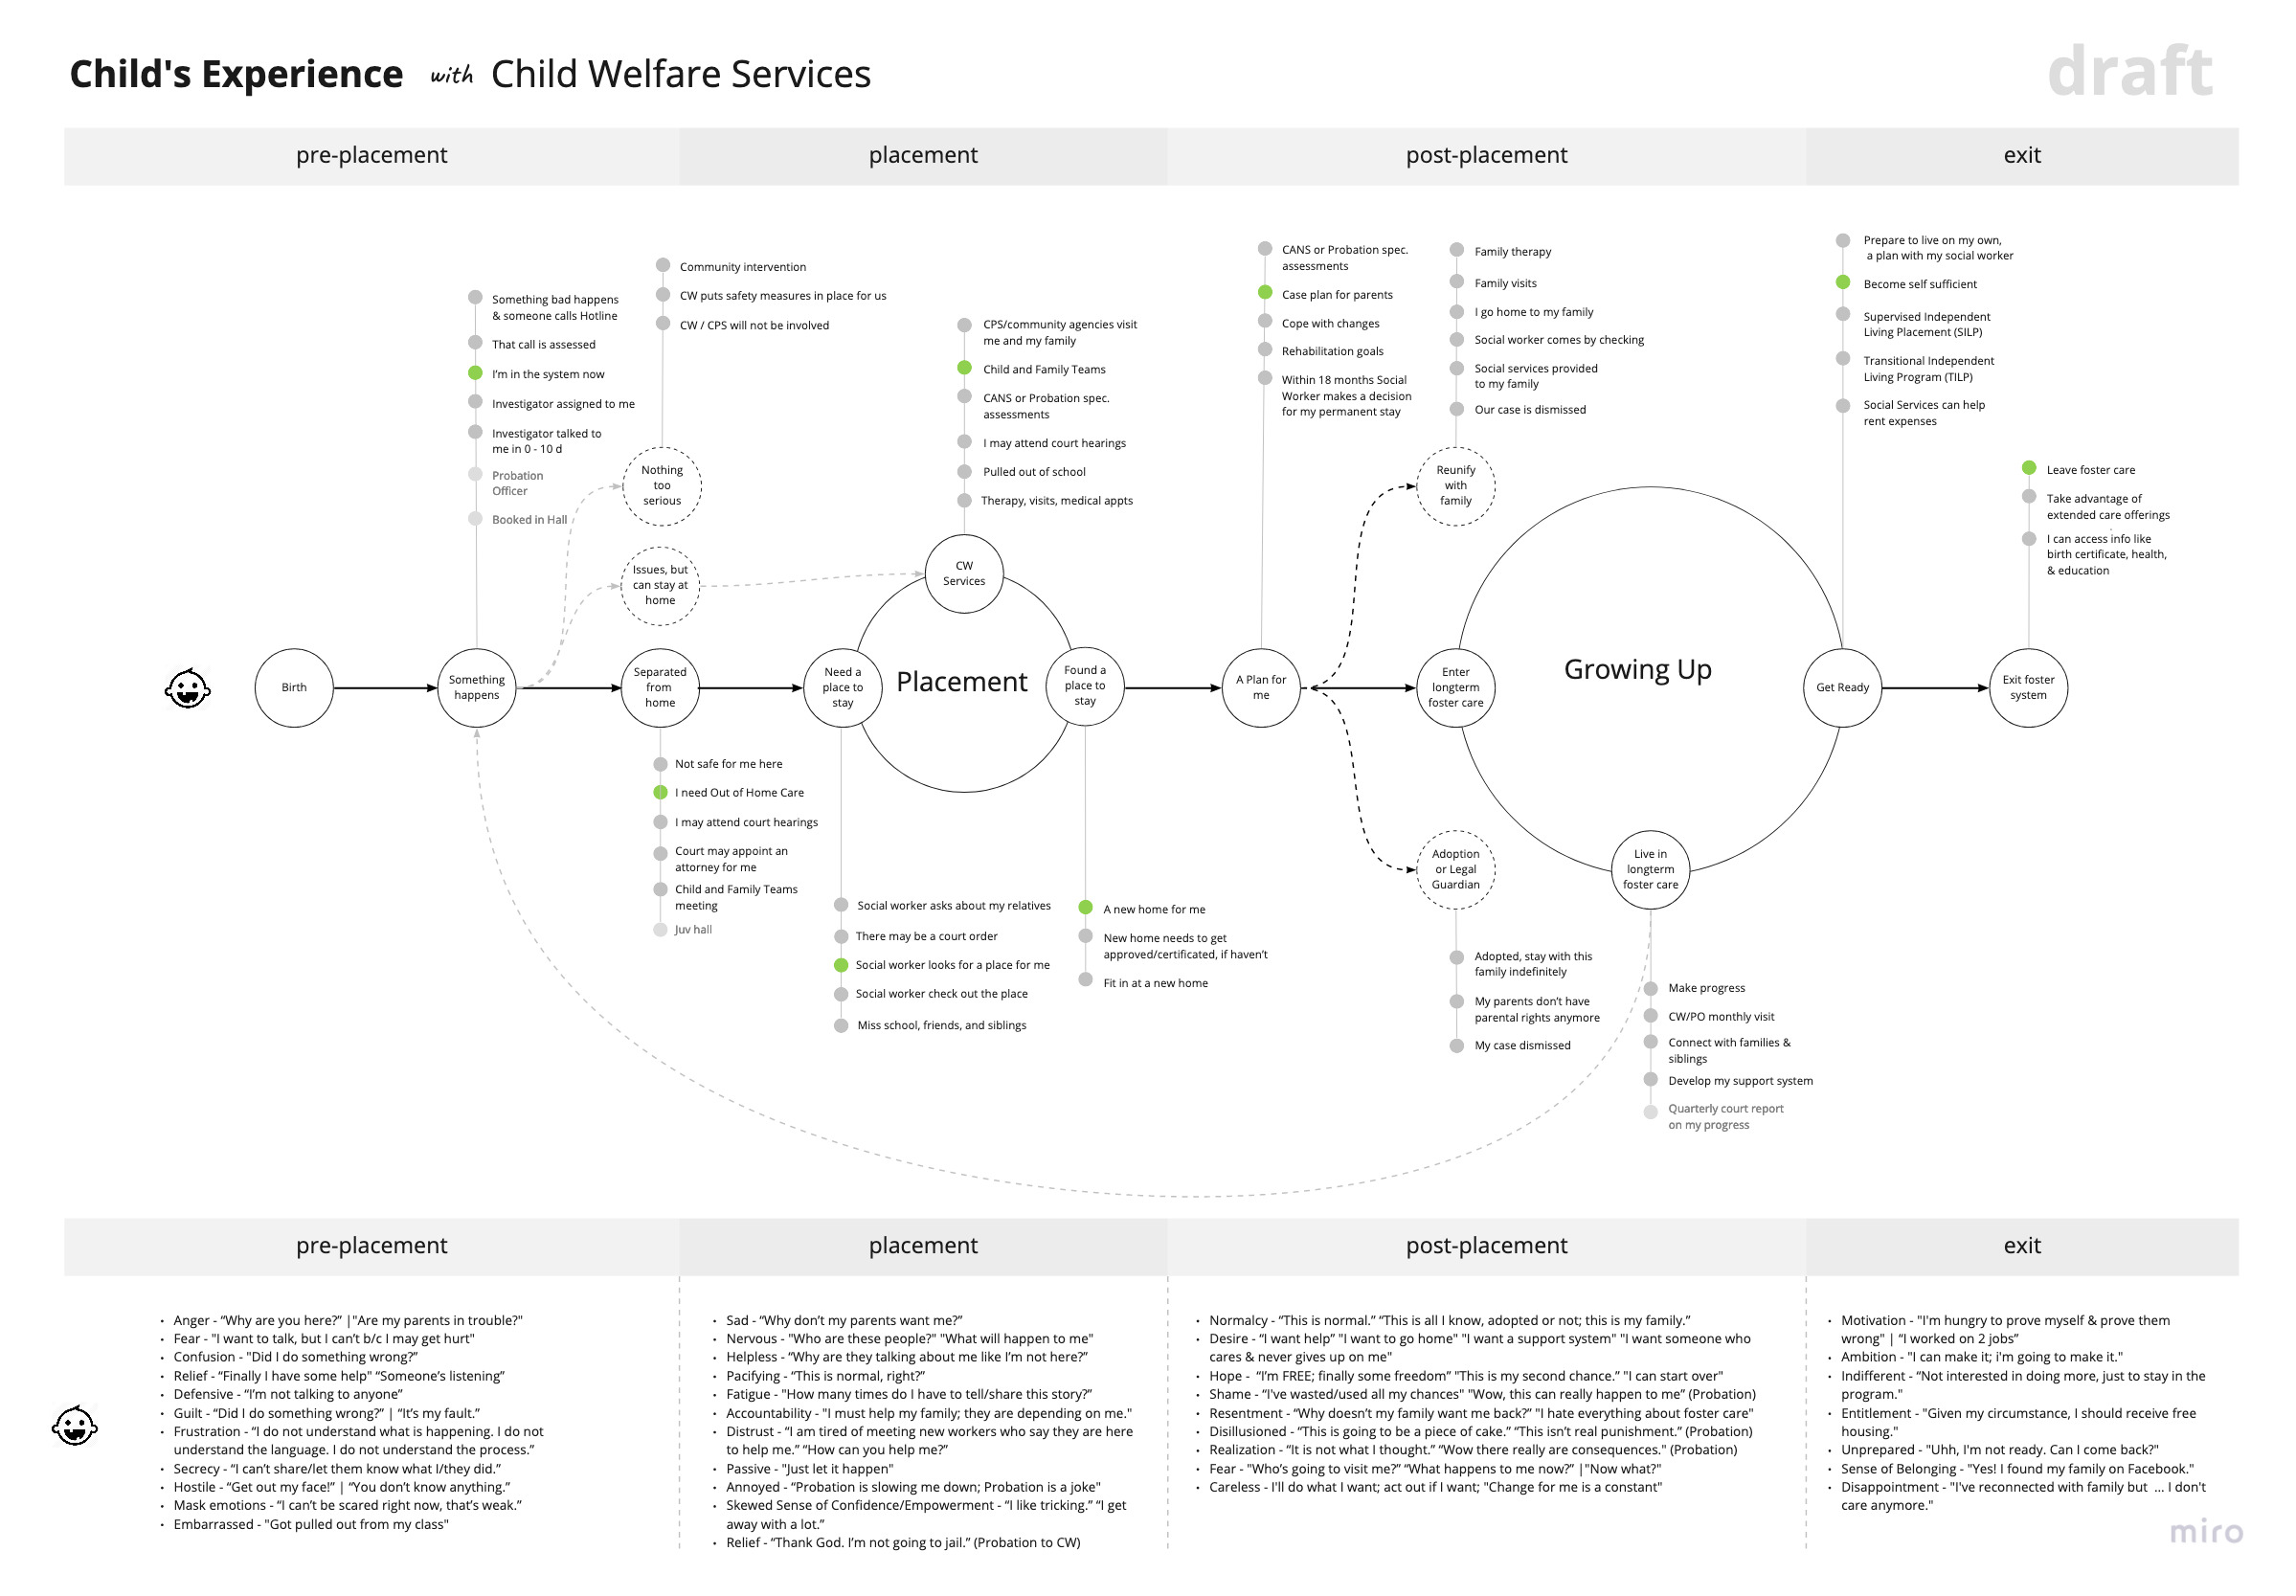 The child's experience map